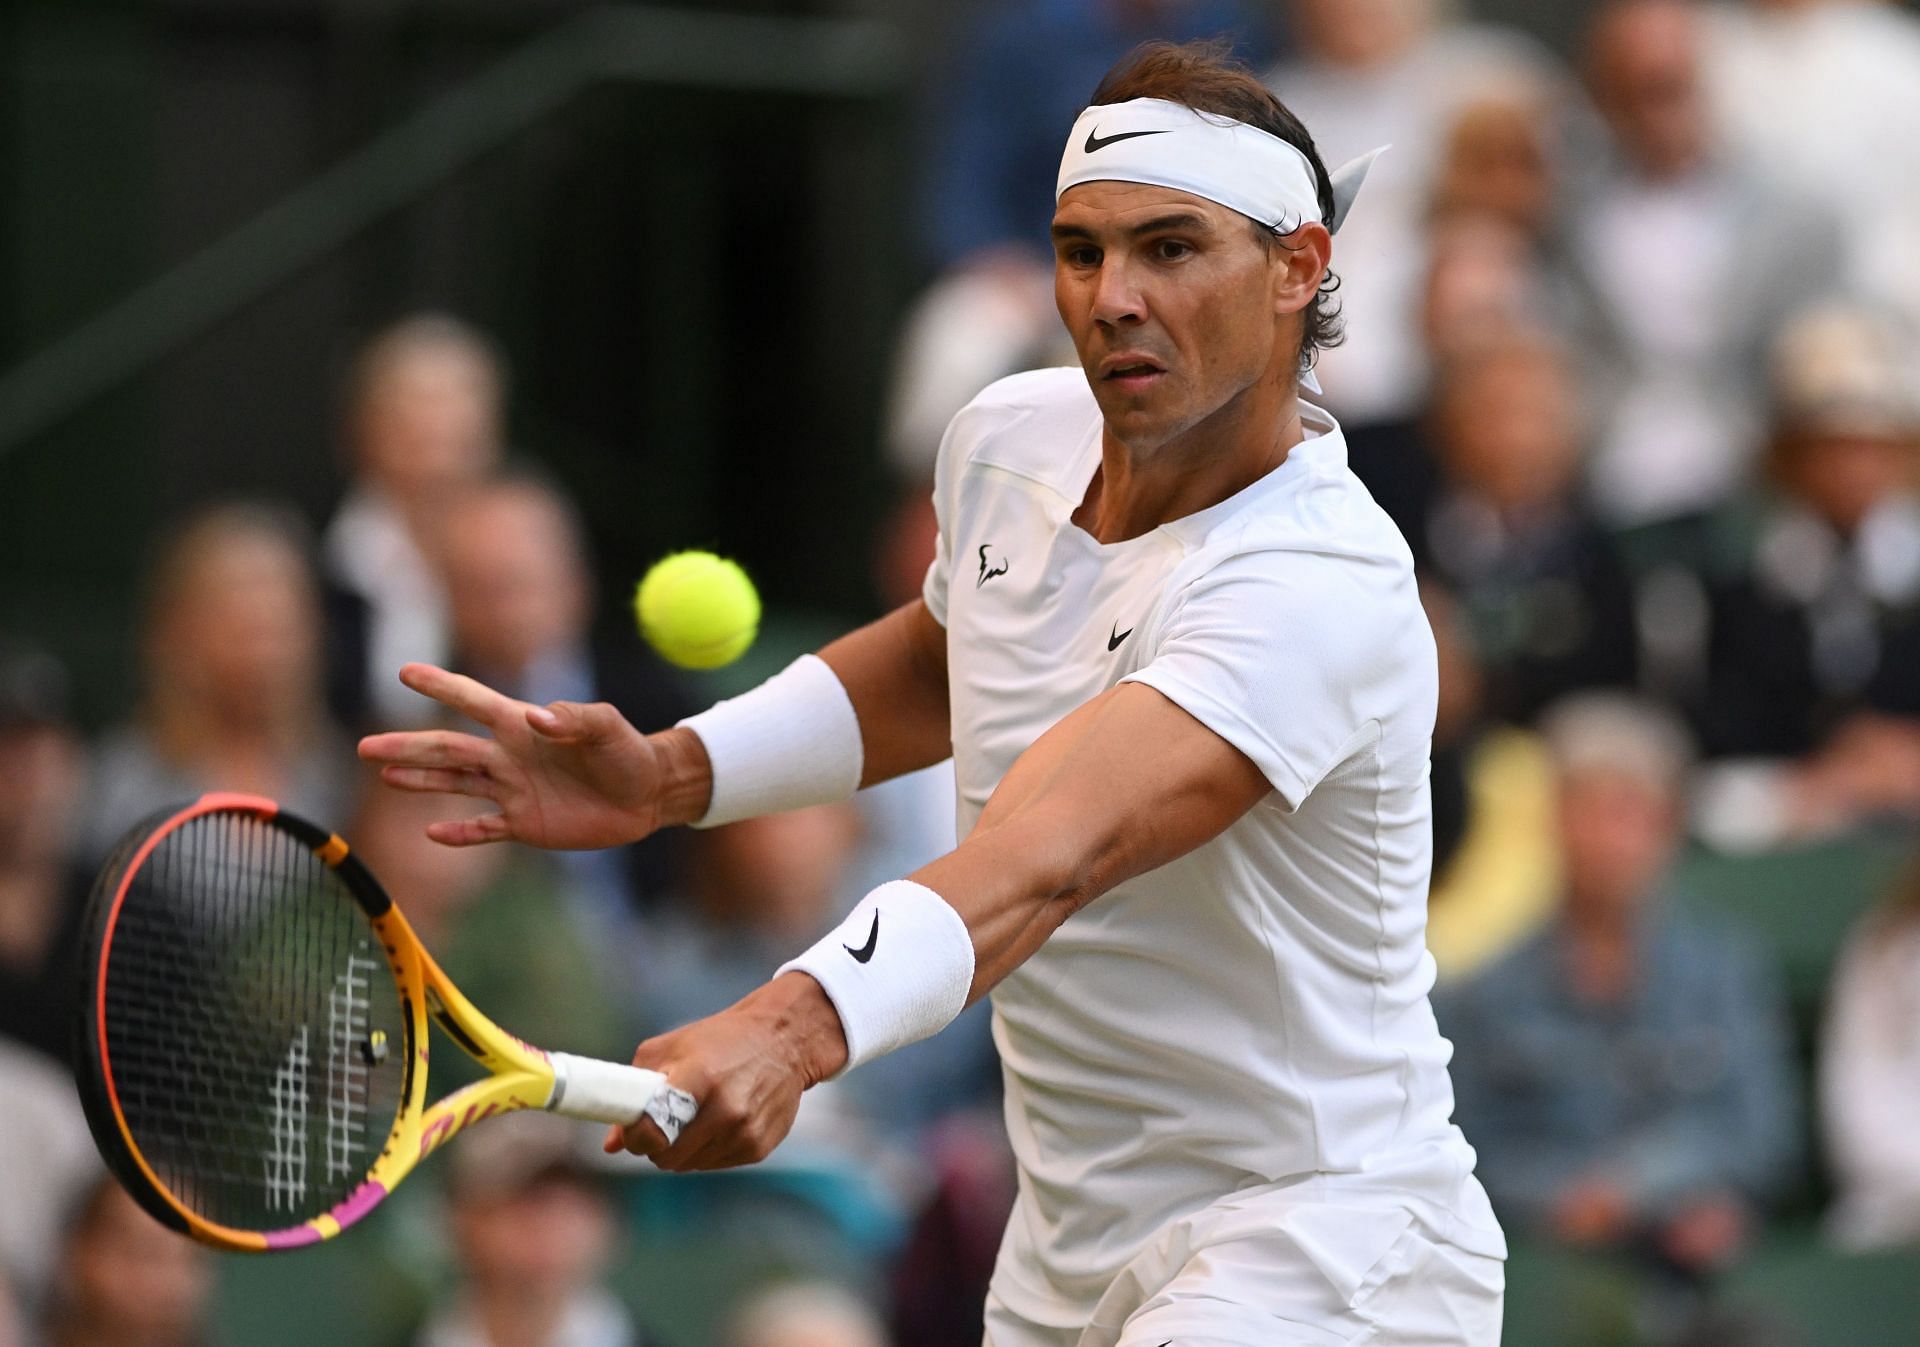 Rafael Nadal is yet to lose a match at the Majors this year